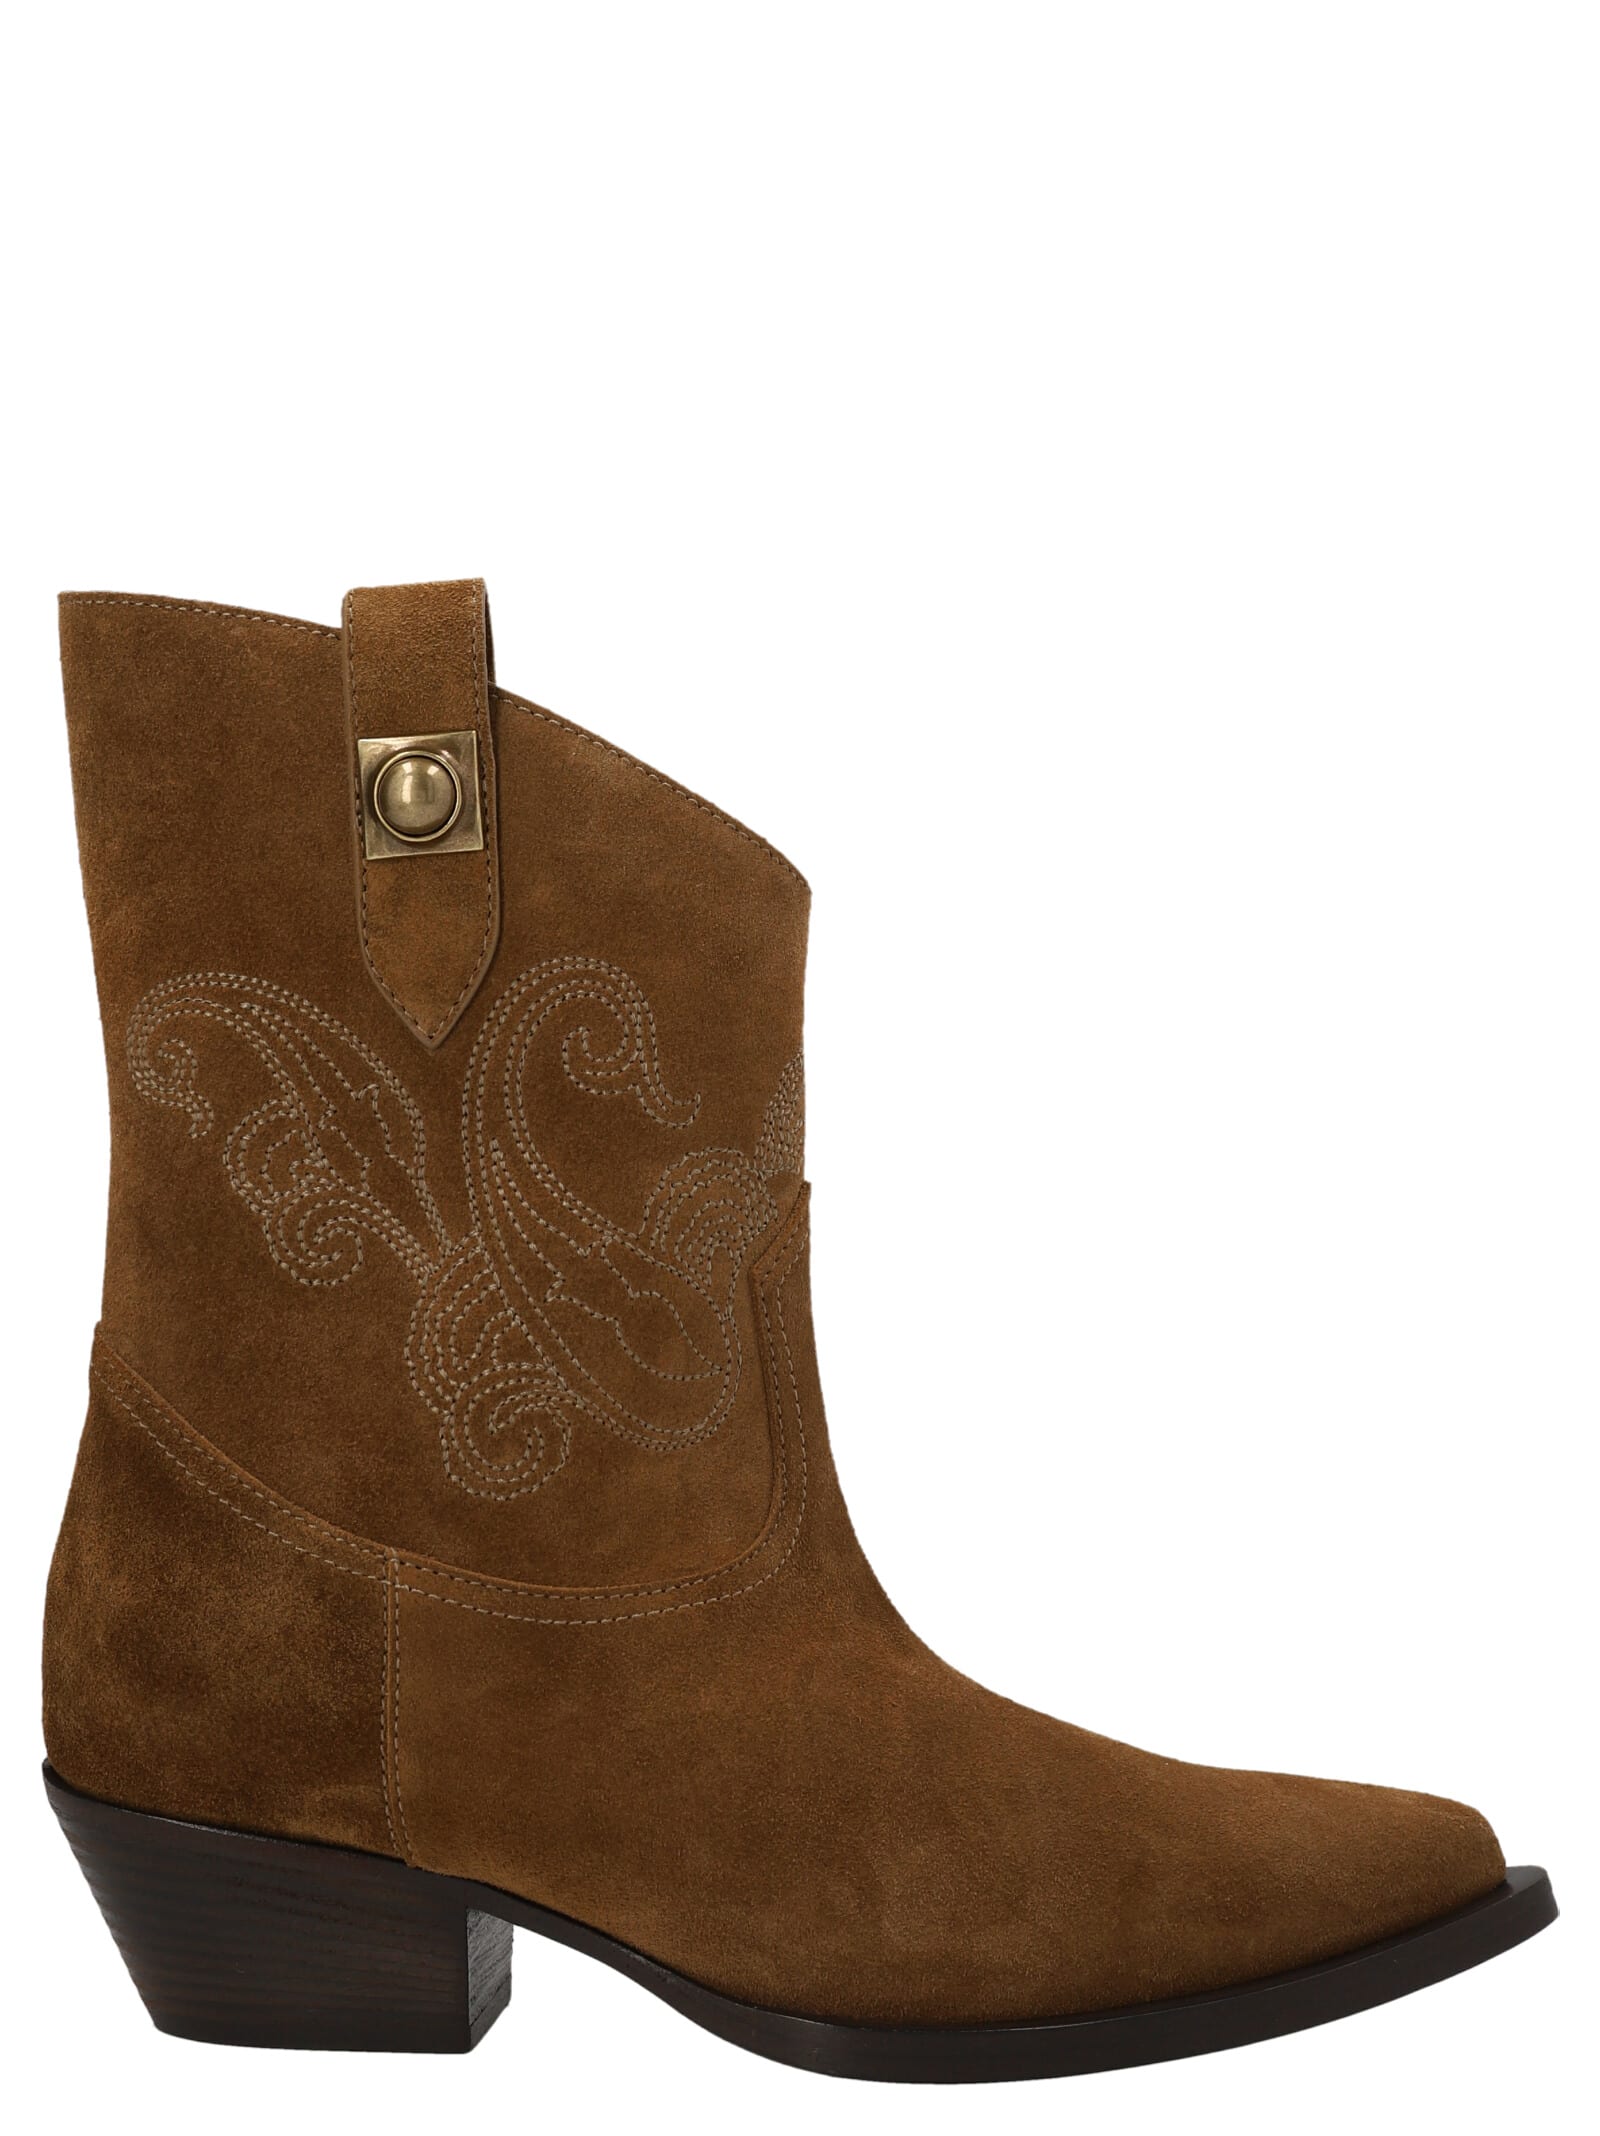 Etro Embroidered Texan Style Boots